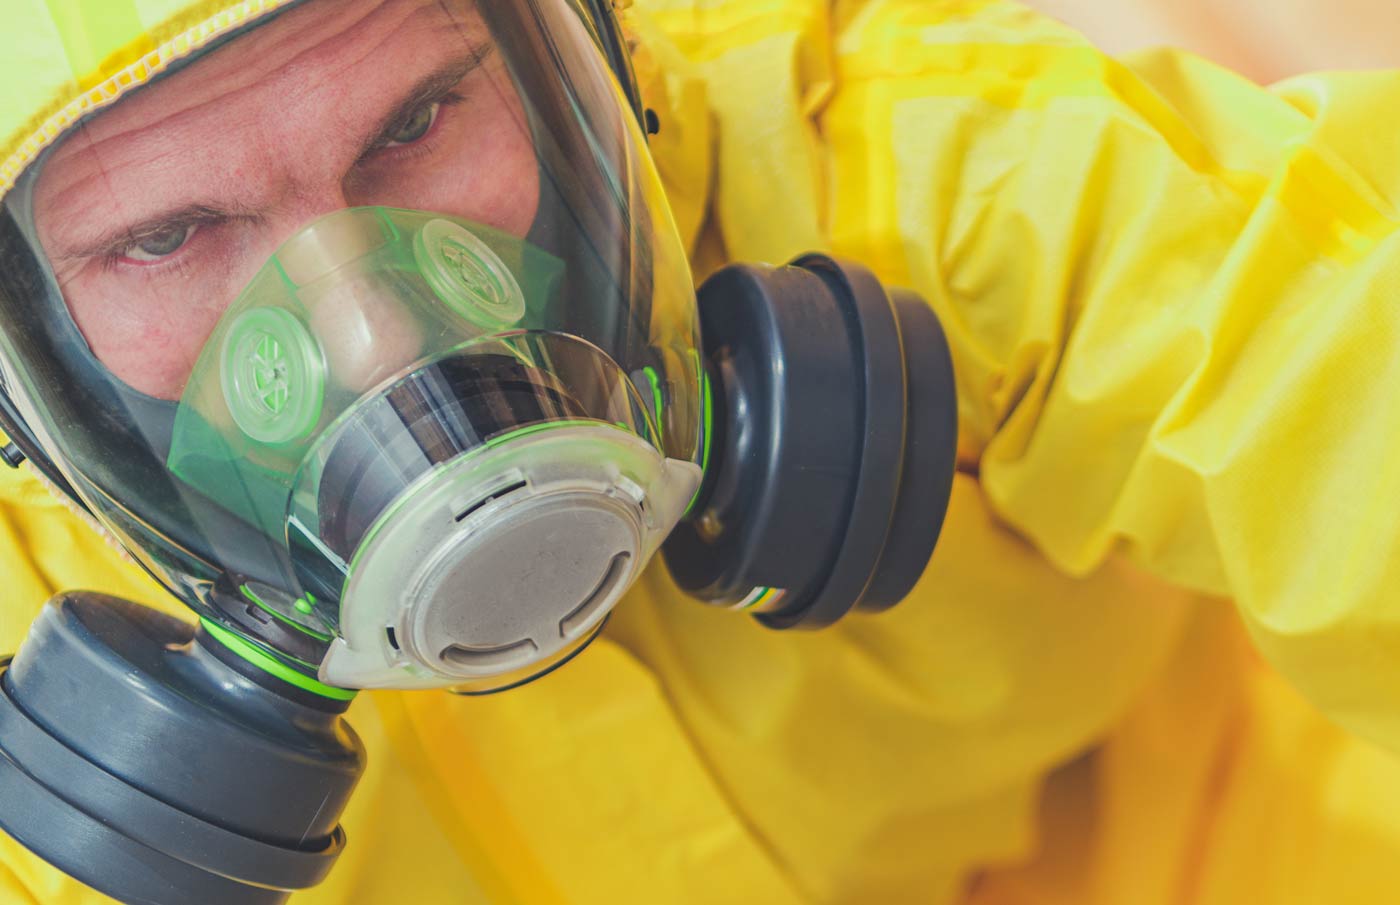 CBRN HazMat Suit - Reusable, Heavy Duty Protective Suit for  Chemical/Biological threats and other Harsh Environments